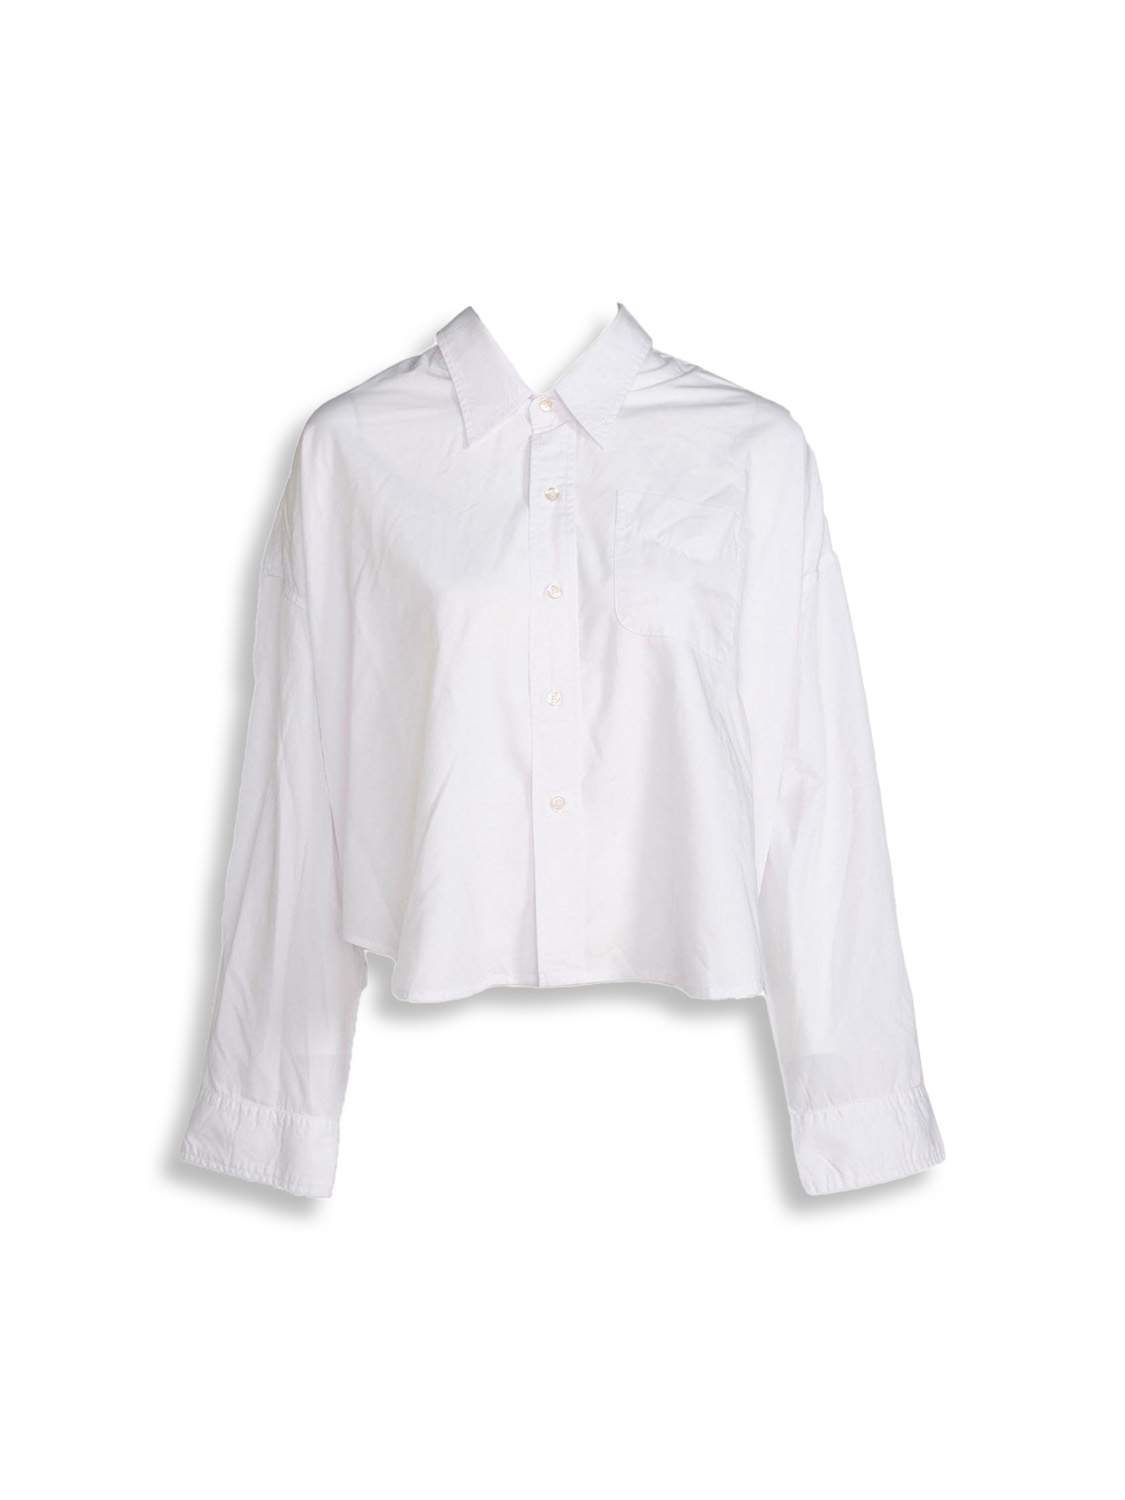 Drop Neck - Cropped blouse with Kent collar